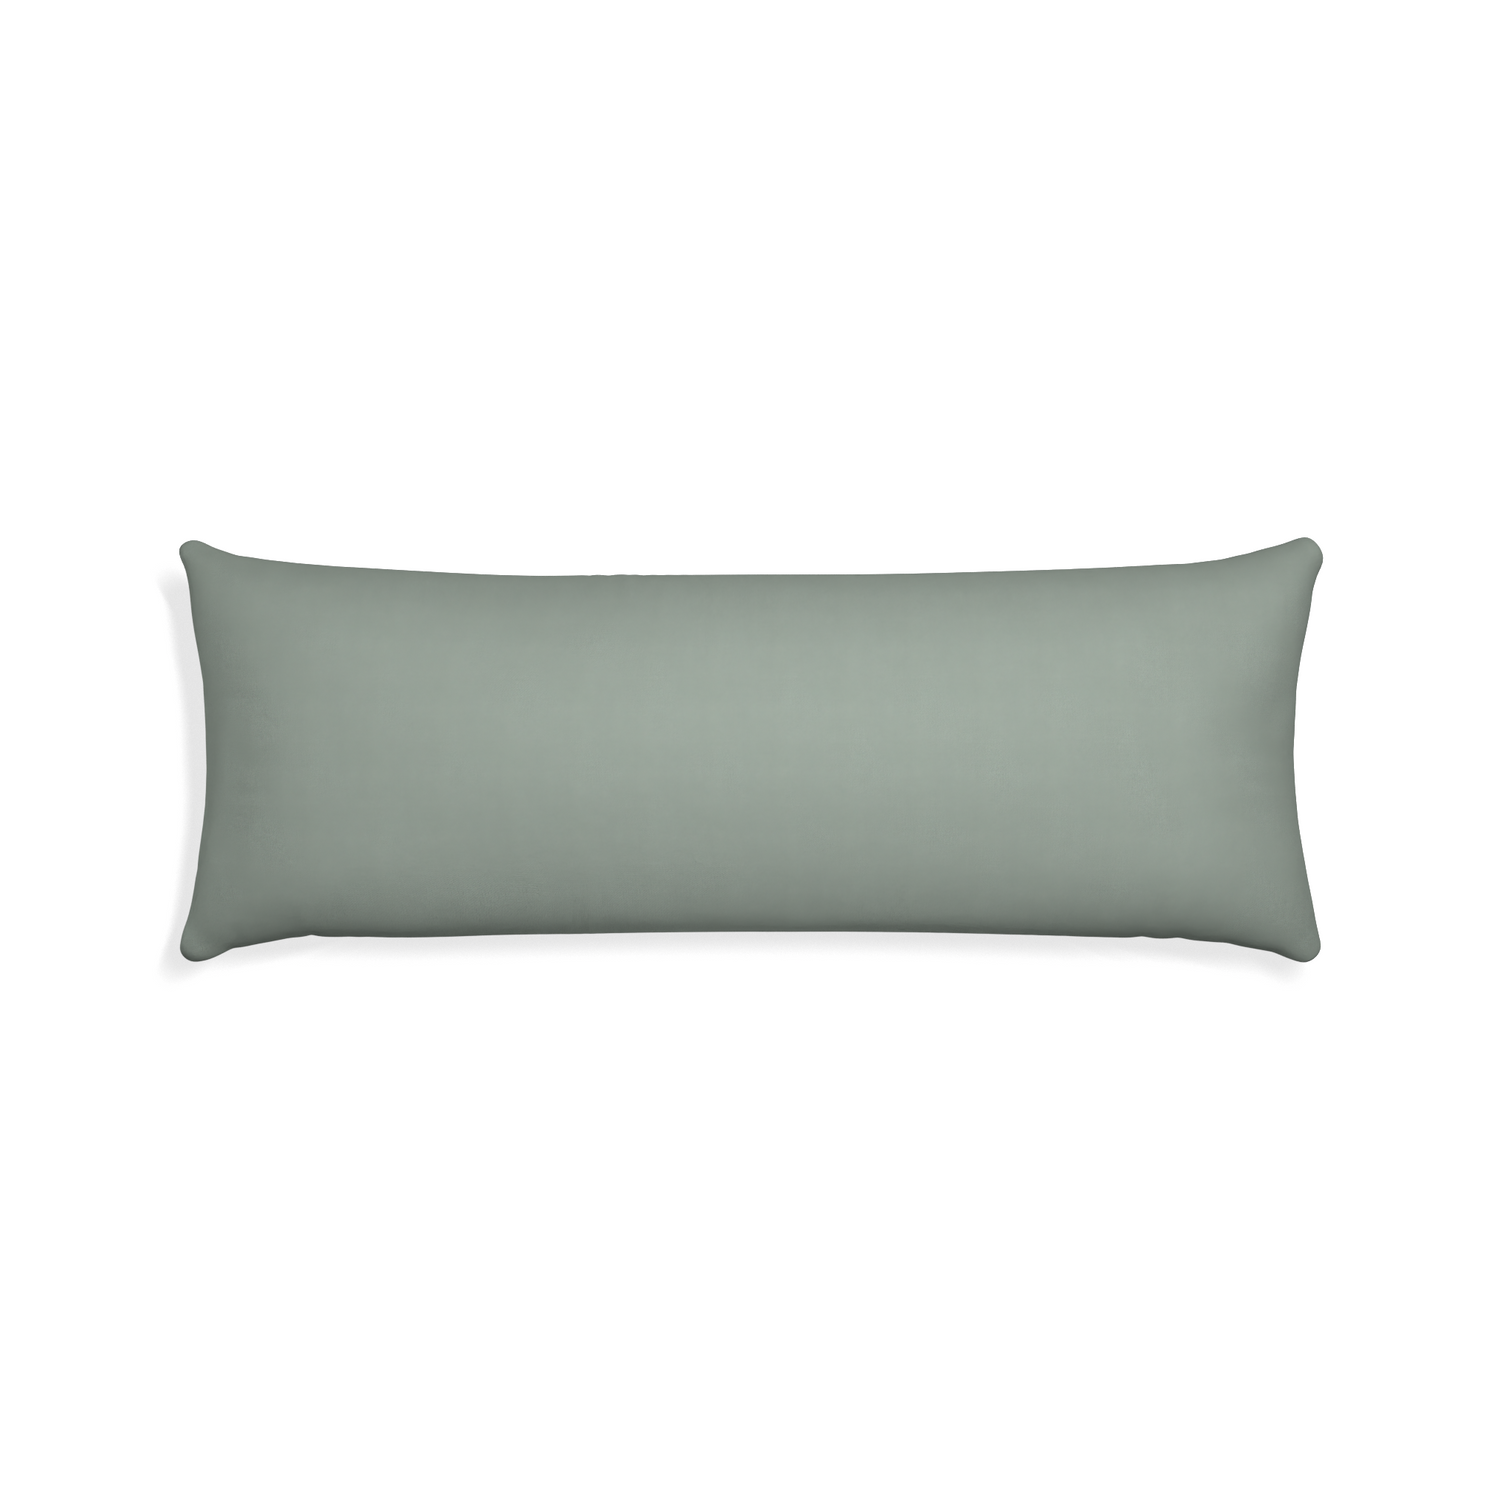 Xl-lumbar sage custom pillow with none on white background